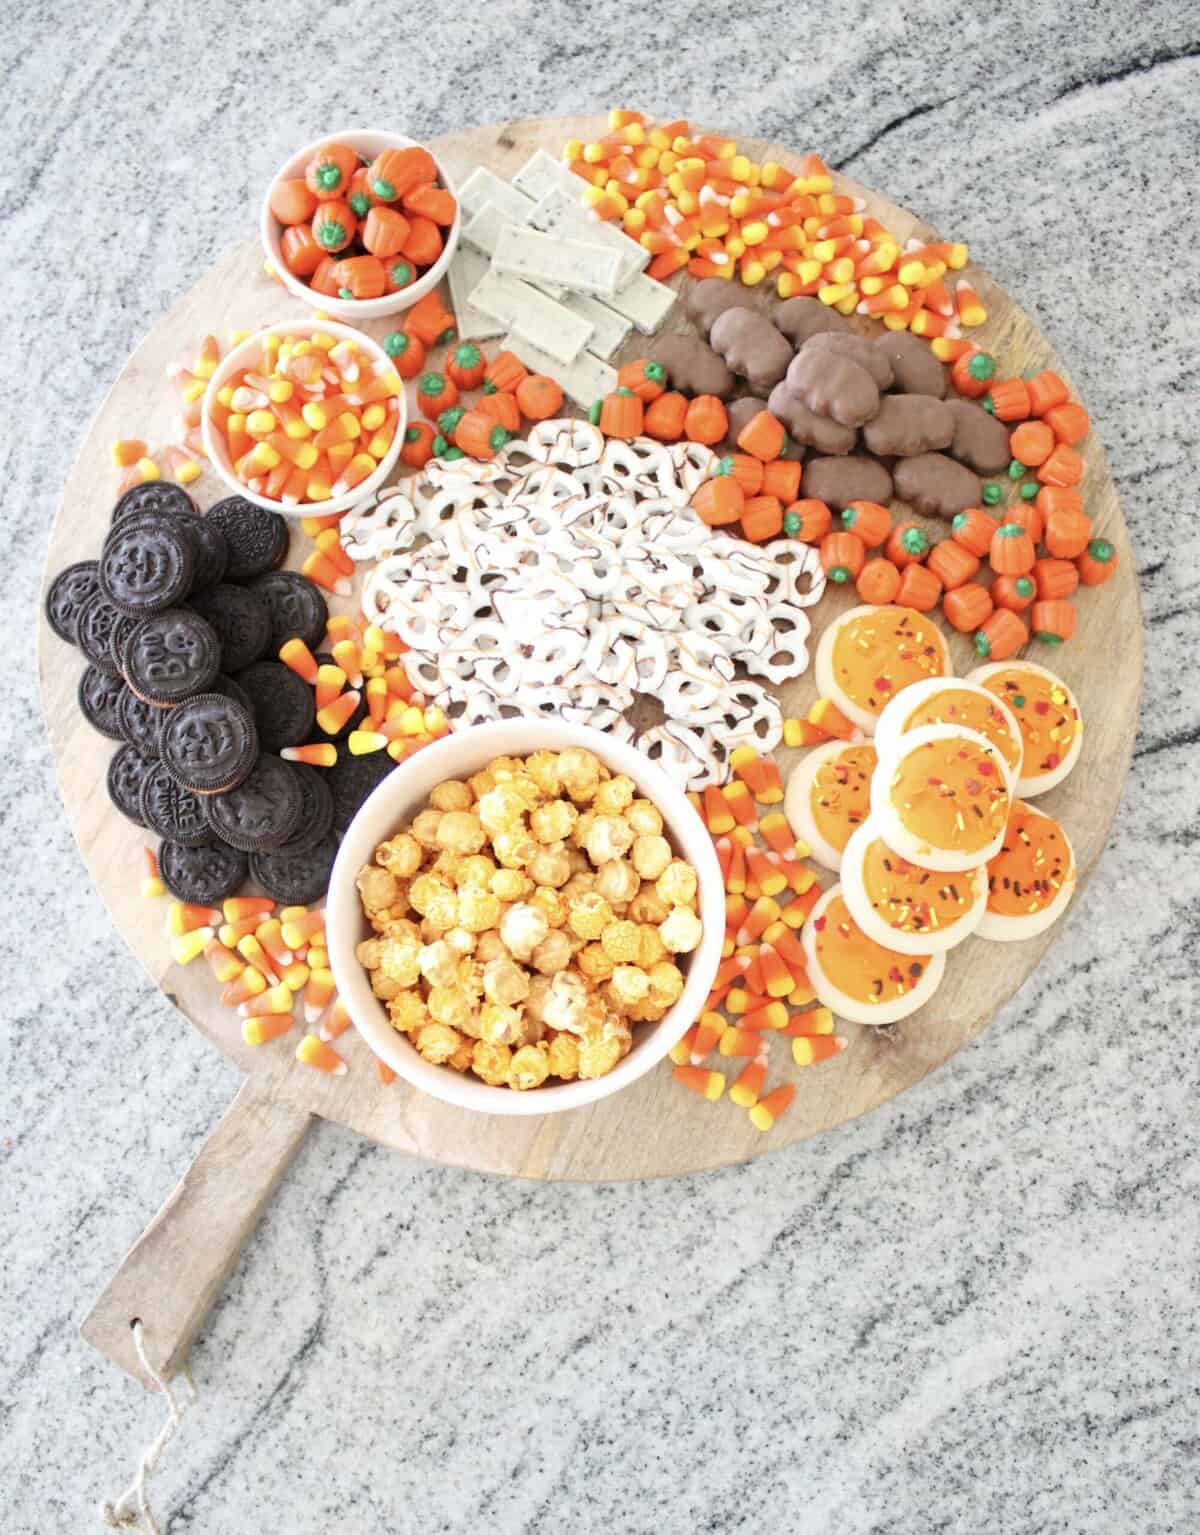 How to Make a Candy Charcuterie Board